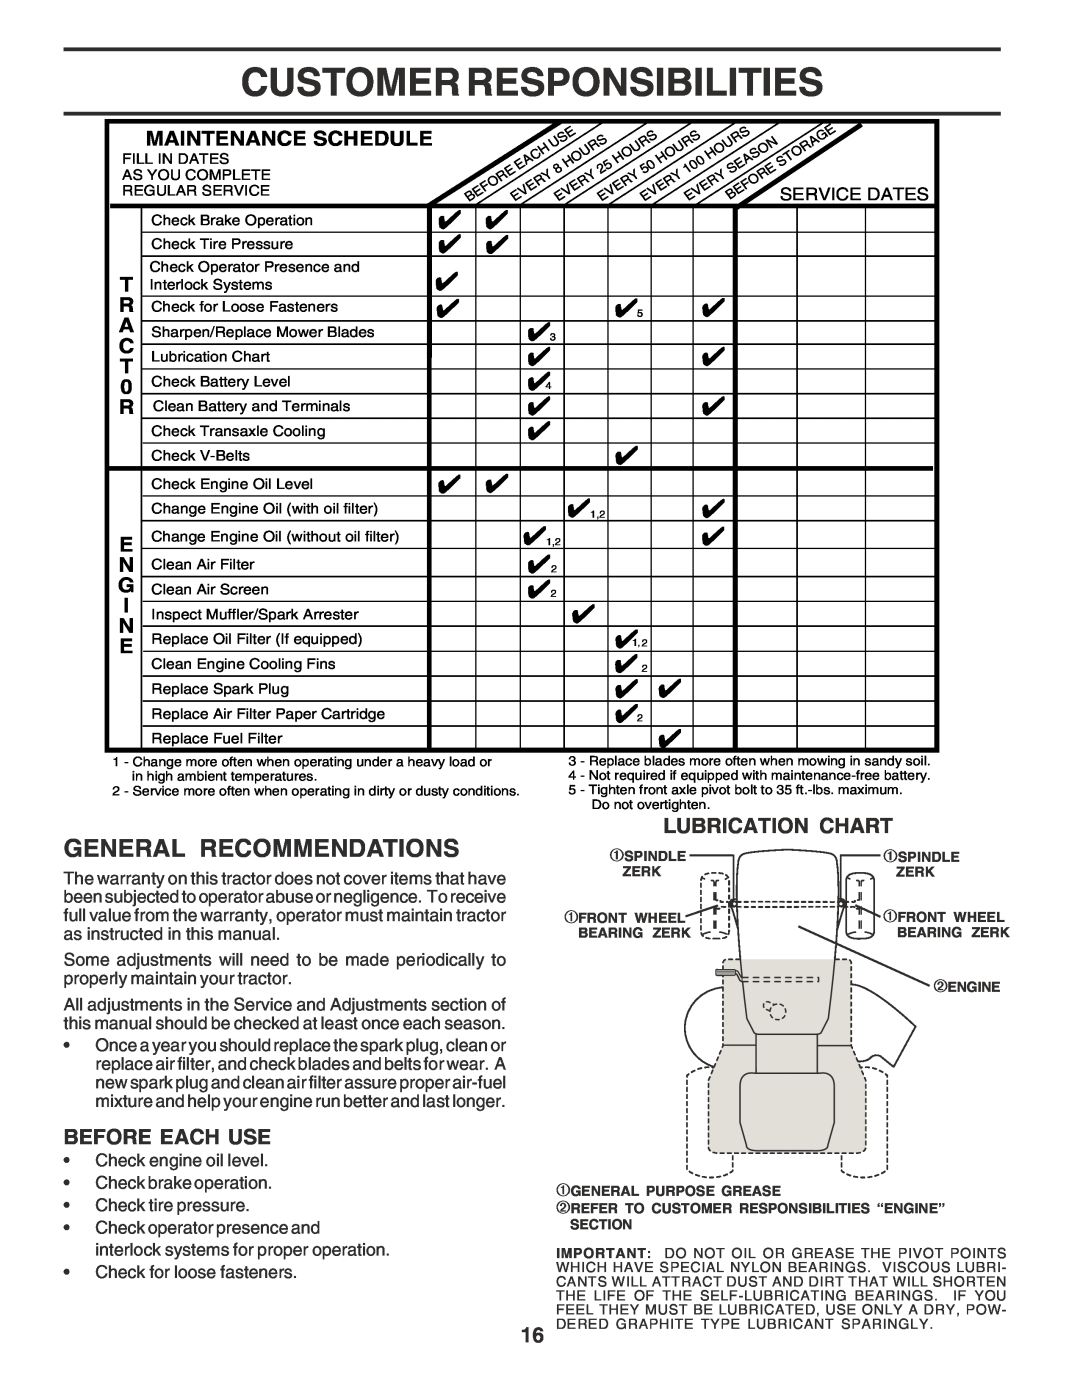 Poulan 182770 owner manual Customer Responsibilities, General Recommendations, Lubrication Chart, Before Each Use 